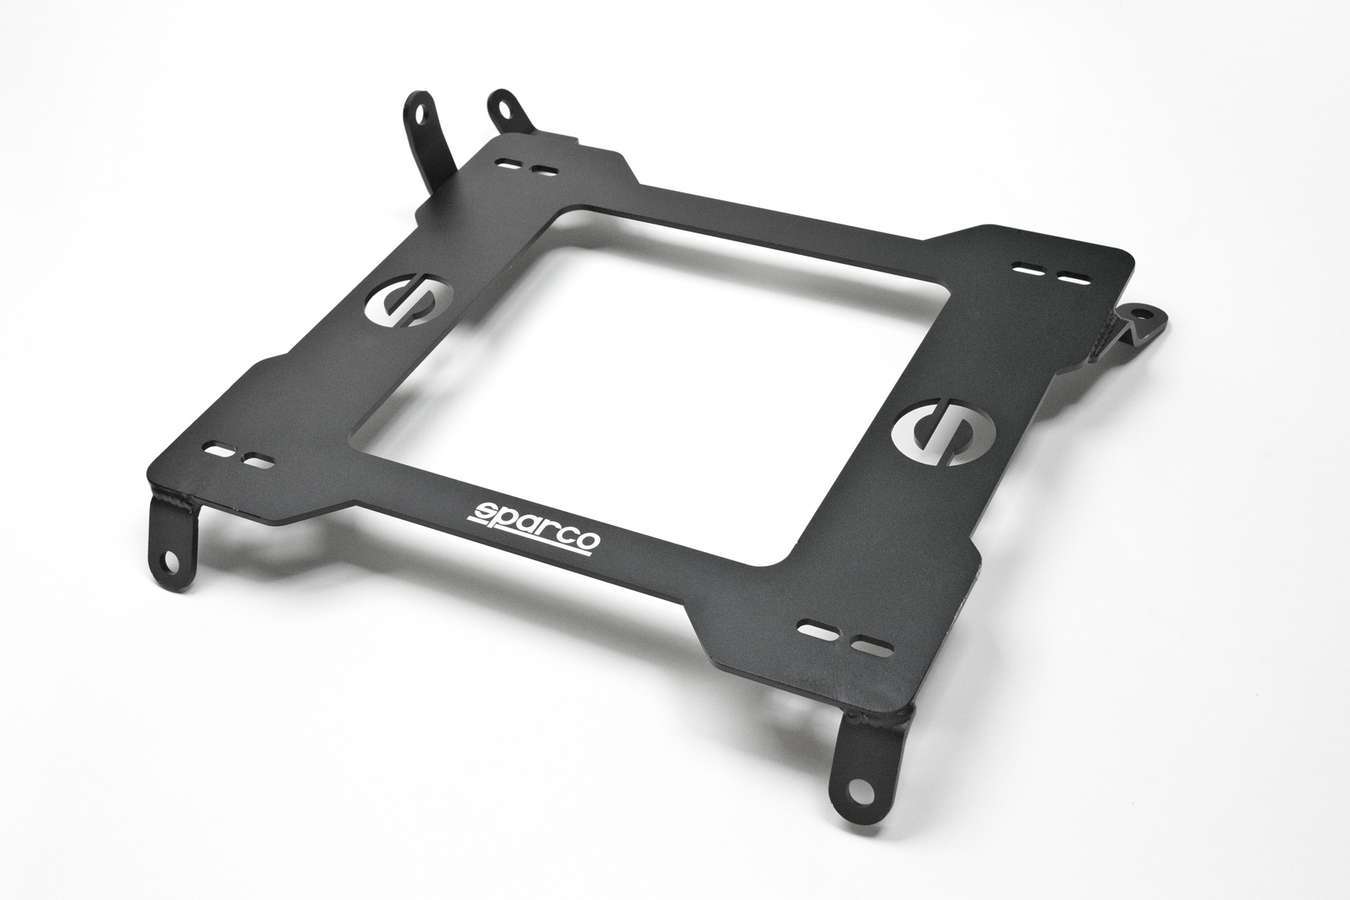 Sparco 600SB010L Seat Adapter Bracket, 600 Series, Sparco to Driver Side Ford Mustang 1979-98, Steel, Black Powder Coat, Each